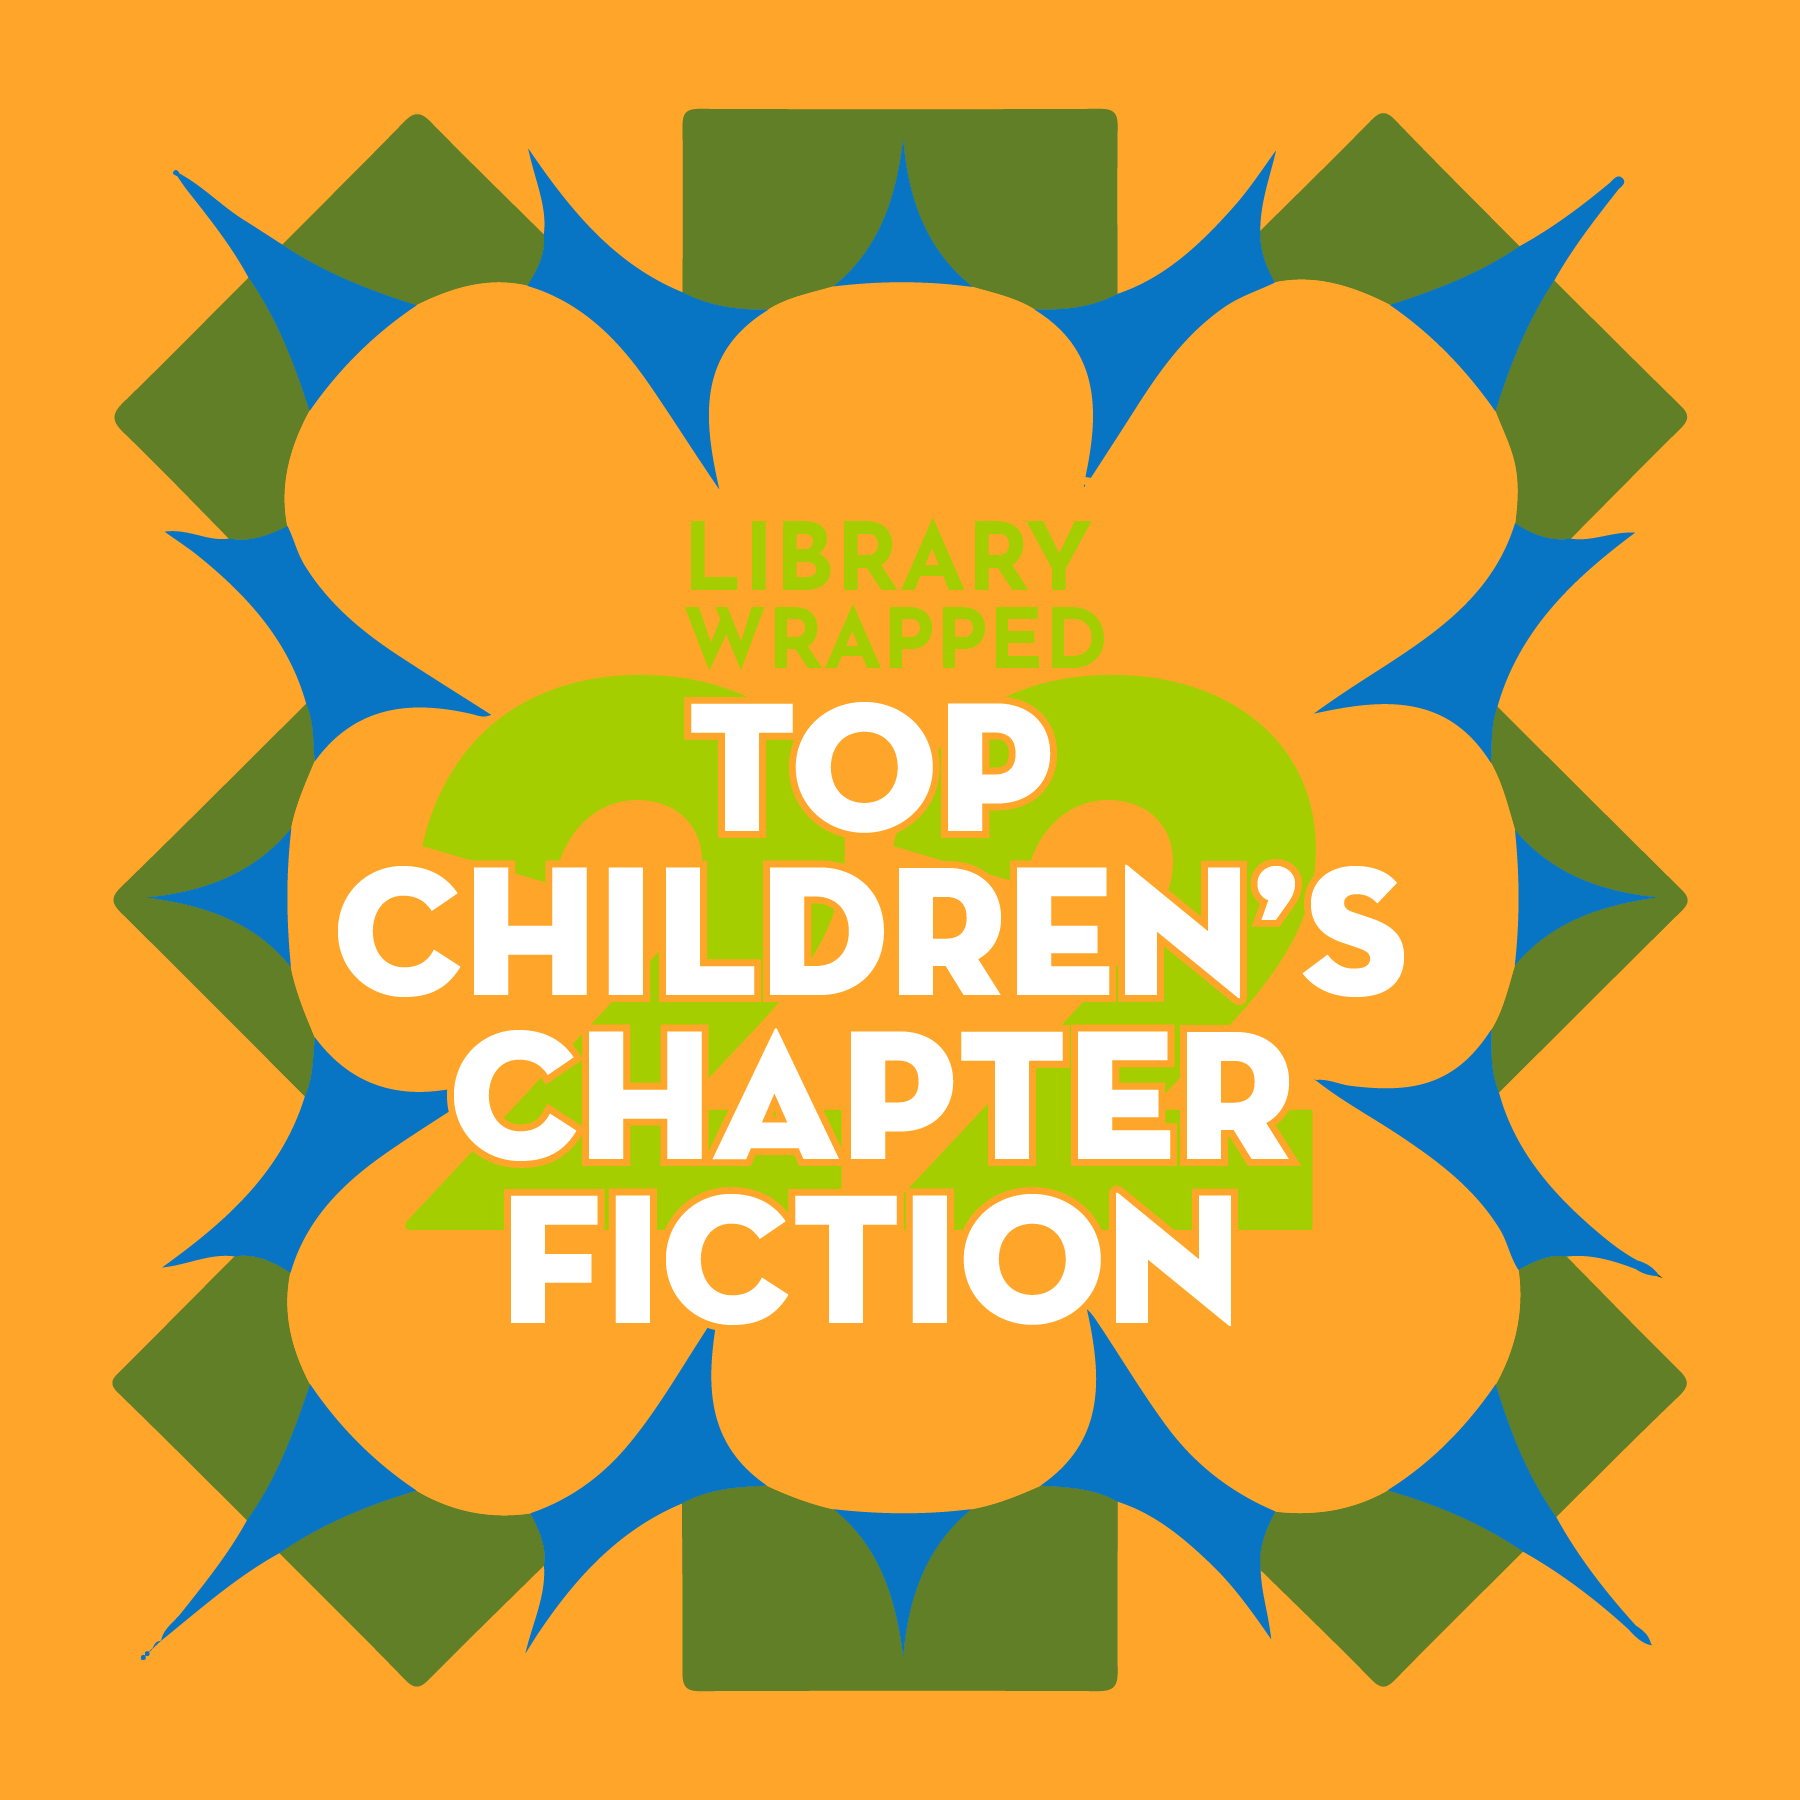 A graphic says 22 Library Wrapped Top Children’s Chapter Fiction over an orange background.